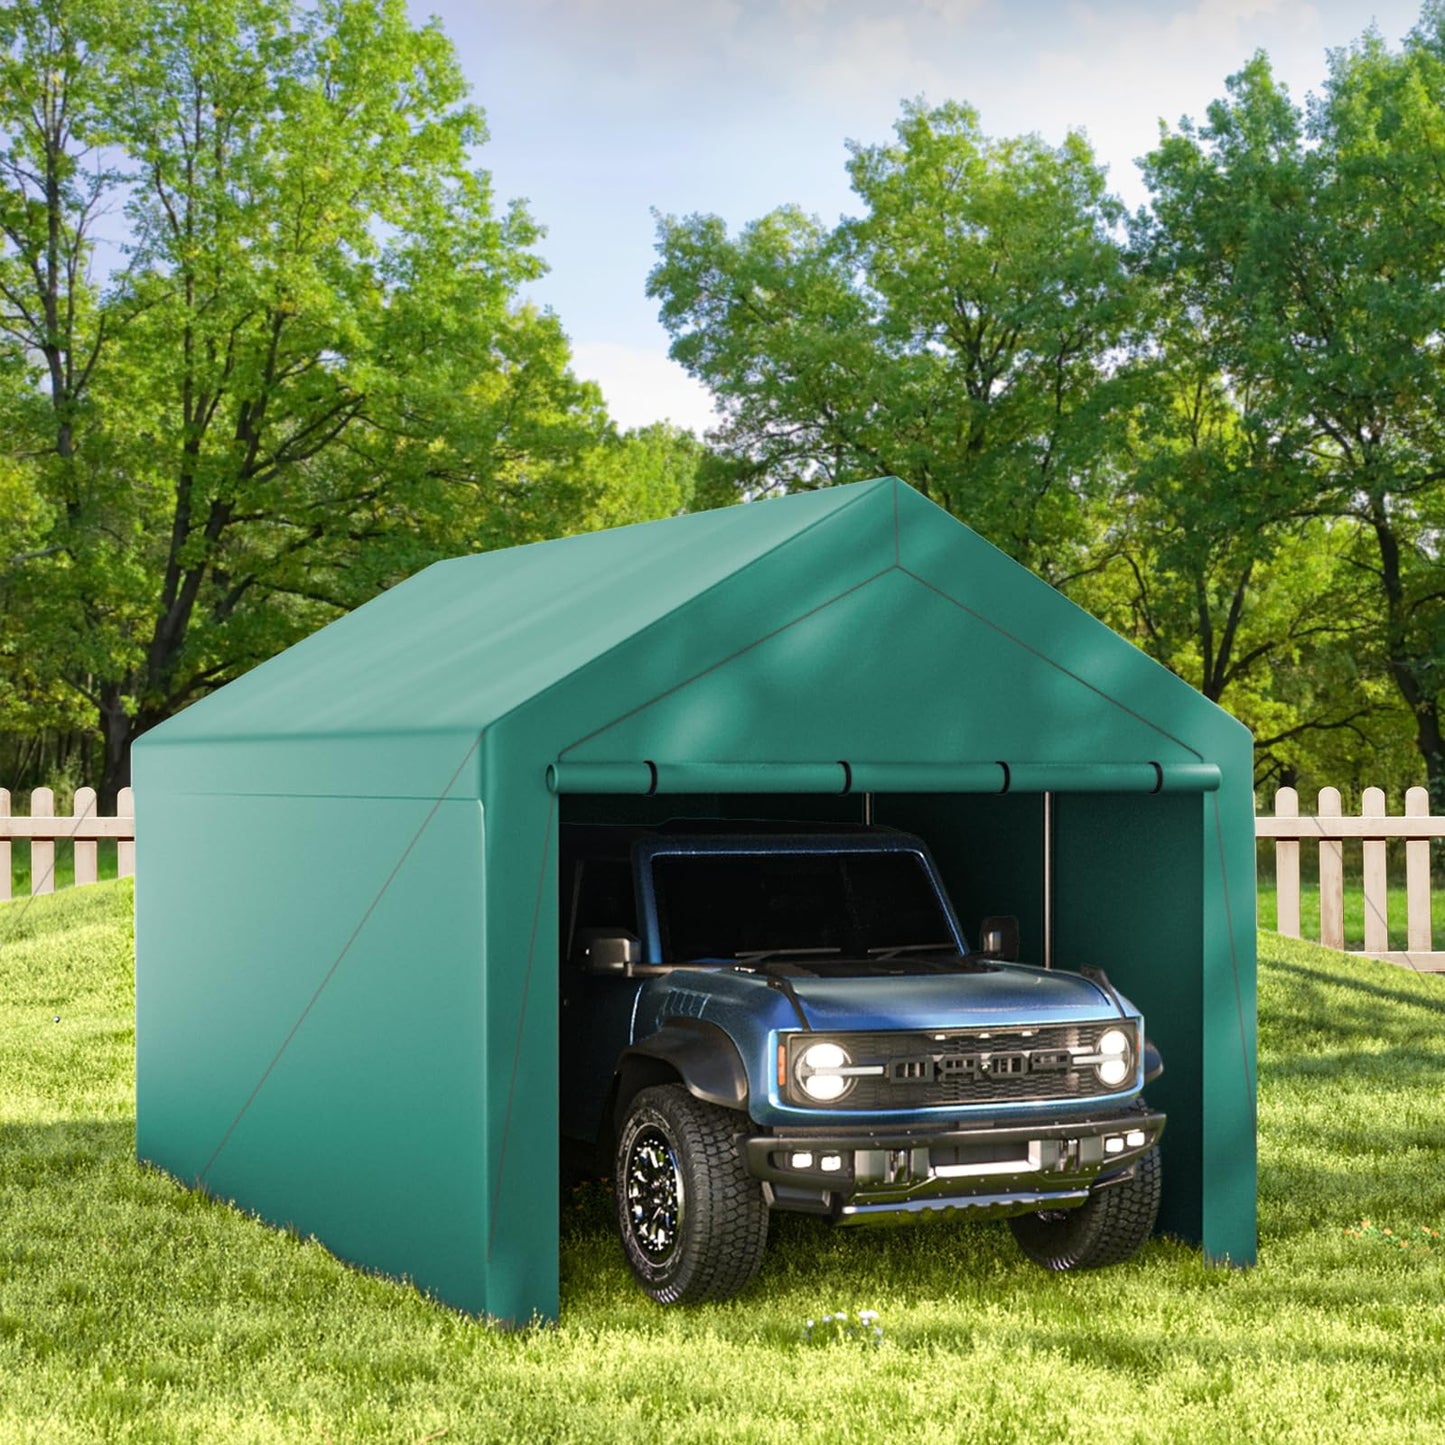 Outdoor Carport 10x20ft Heavy Duty Car Tent, Portable Garage Canopy Storage Shed, Car Shelter with Detachable Side Walls&Doors, All-Season Tarp for